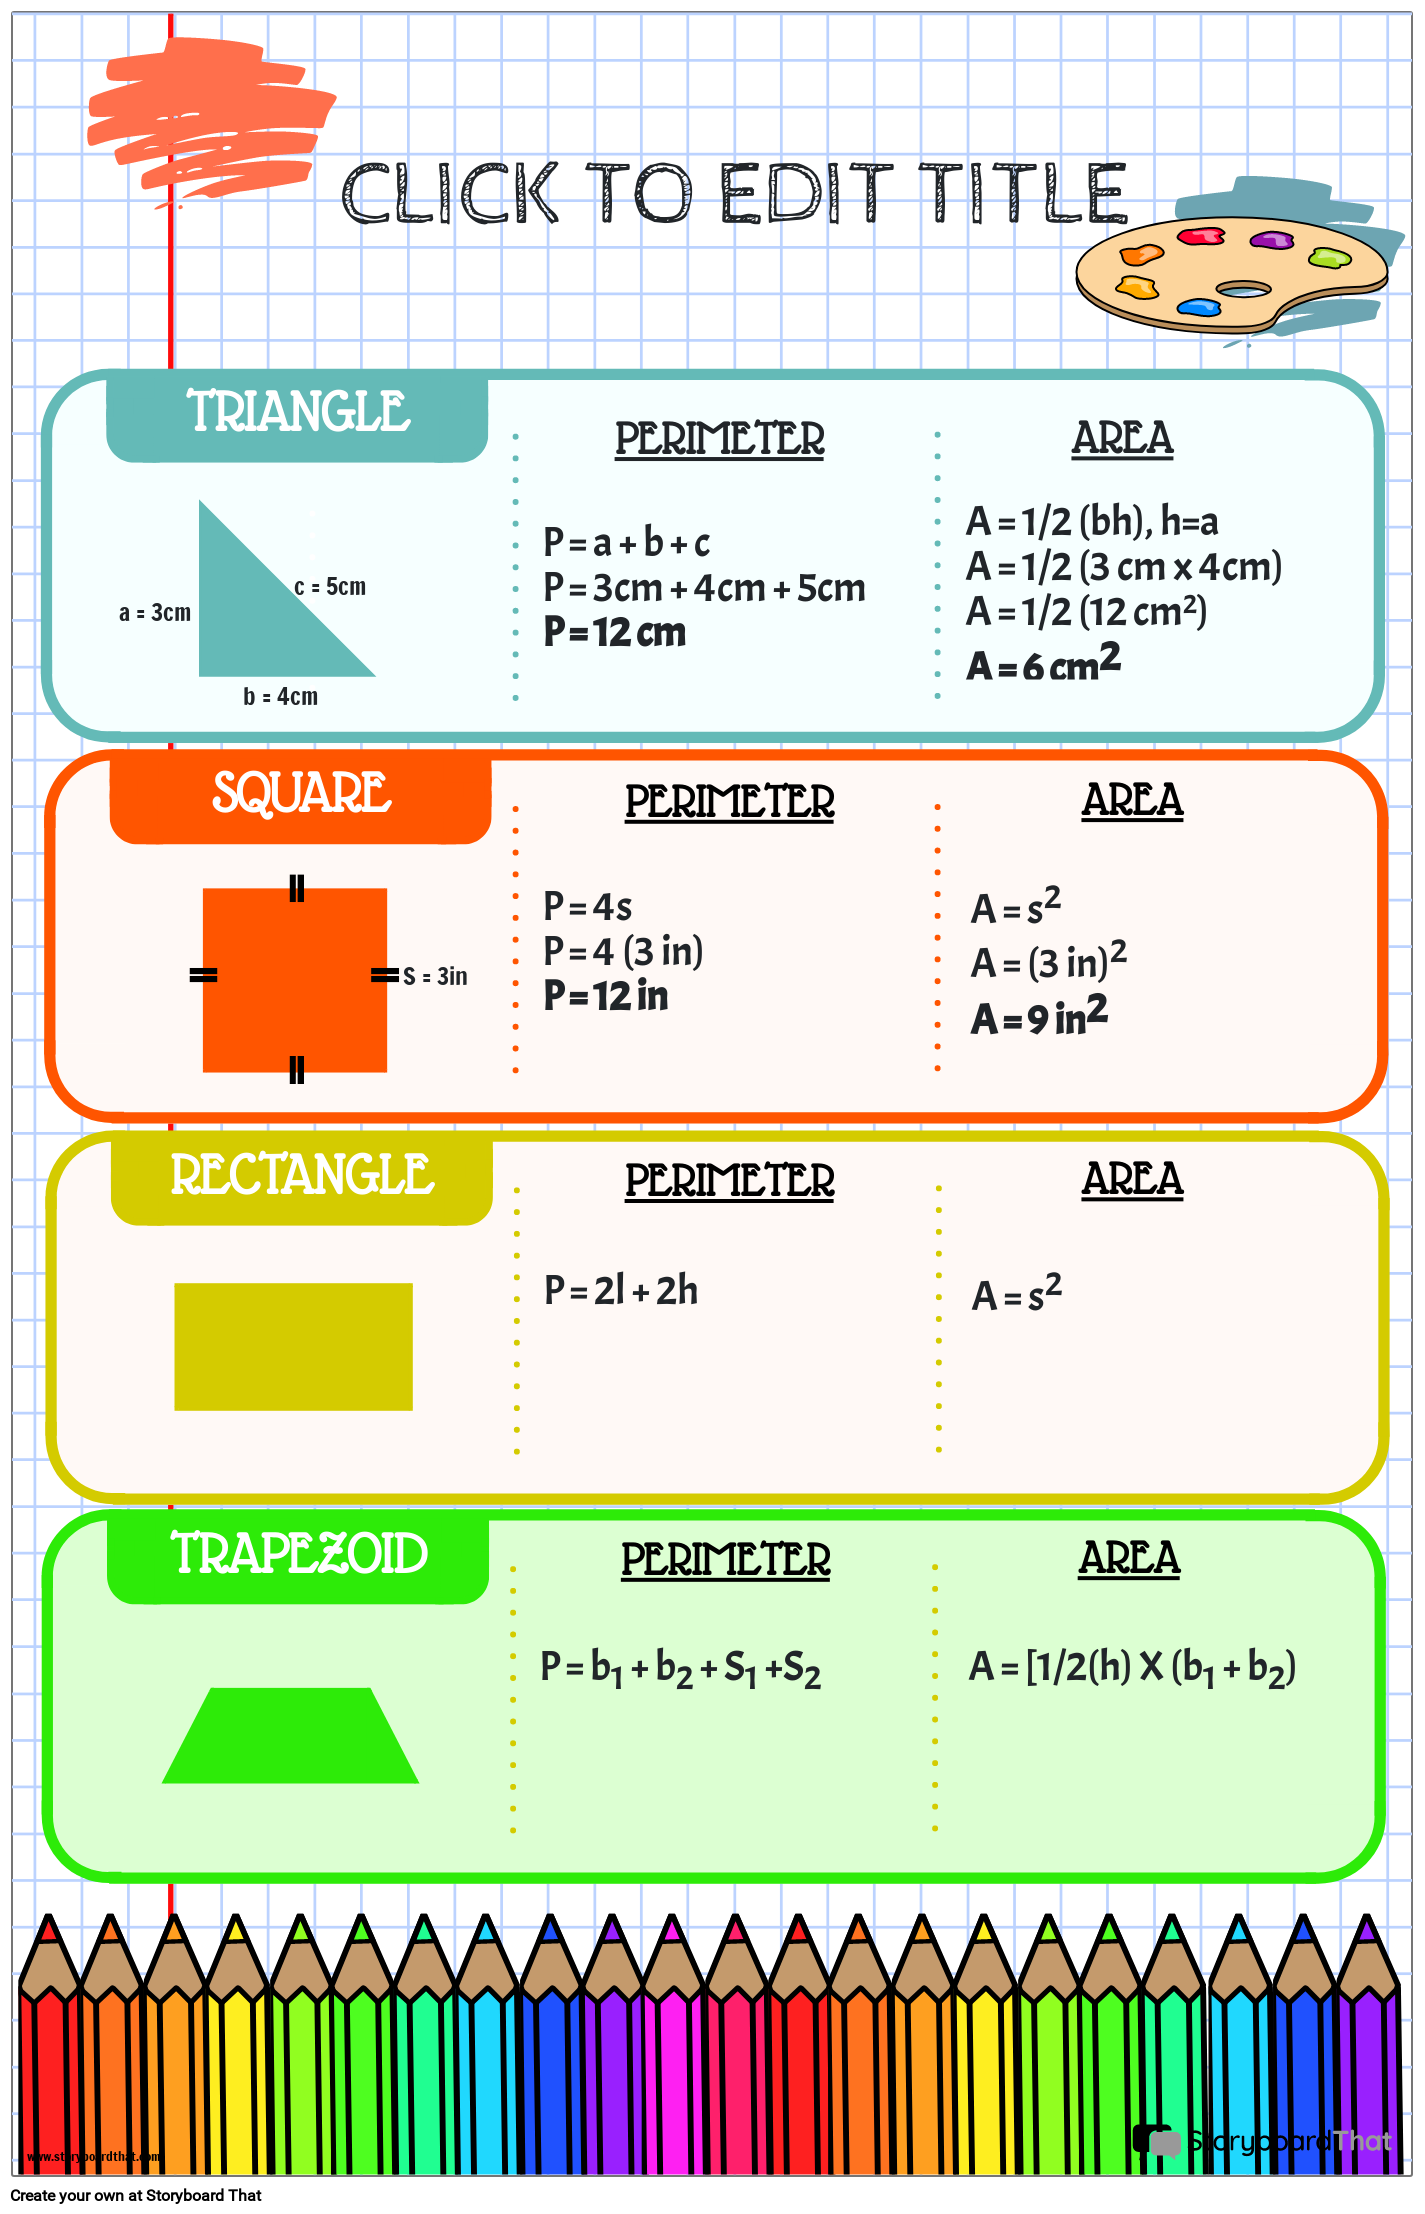 School-themed Area and Perimeter Units of Measurement Poster